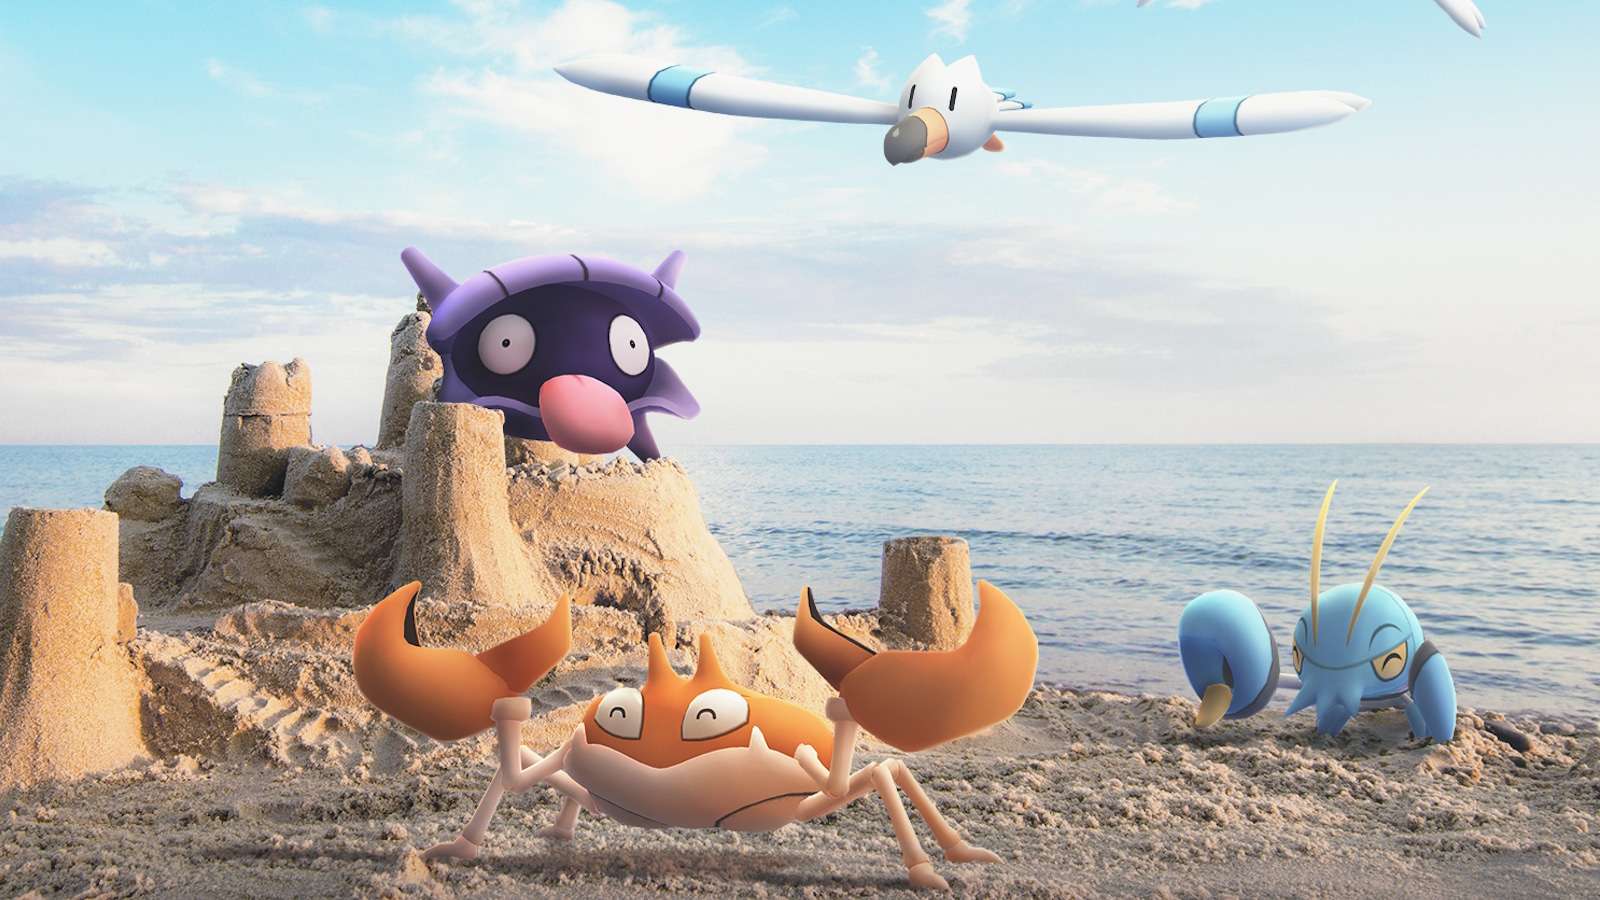 Promo image for Pokemon Go beach event featuring Shellder, Wingull, Krabby, and Clauncher.